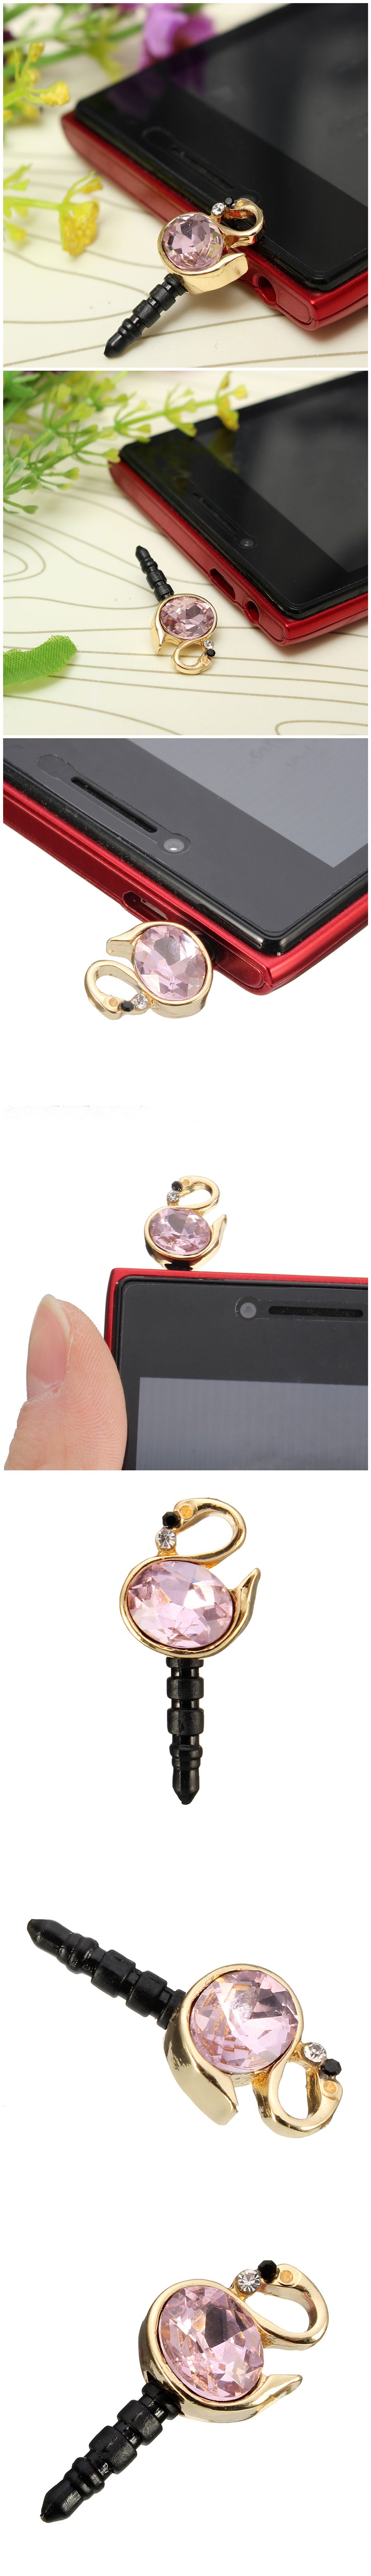 35mm-Anti-Dust-Plug-3D-Swan-Earphone-Plug-Cover-Stopper-Cap-Universal-For-iPhone-Cell-Phone-1027690